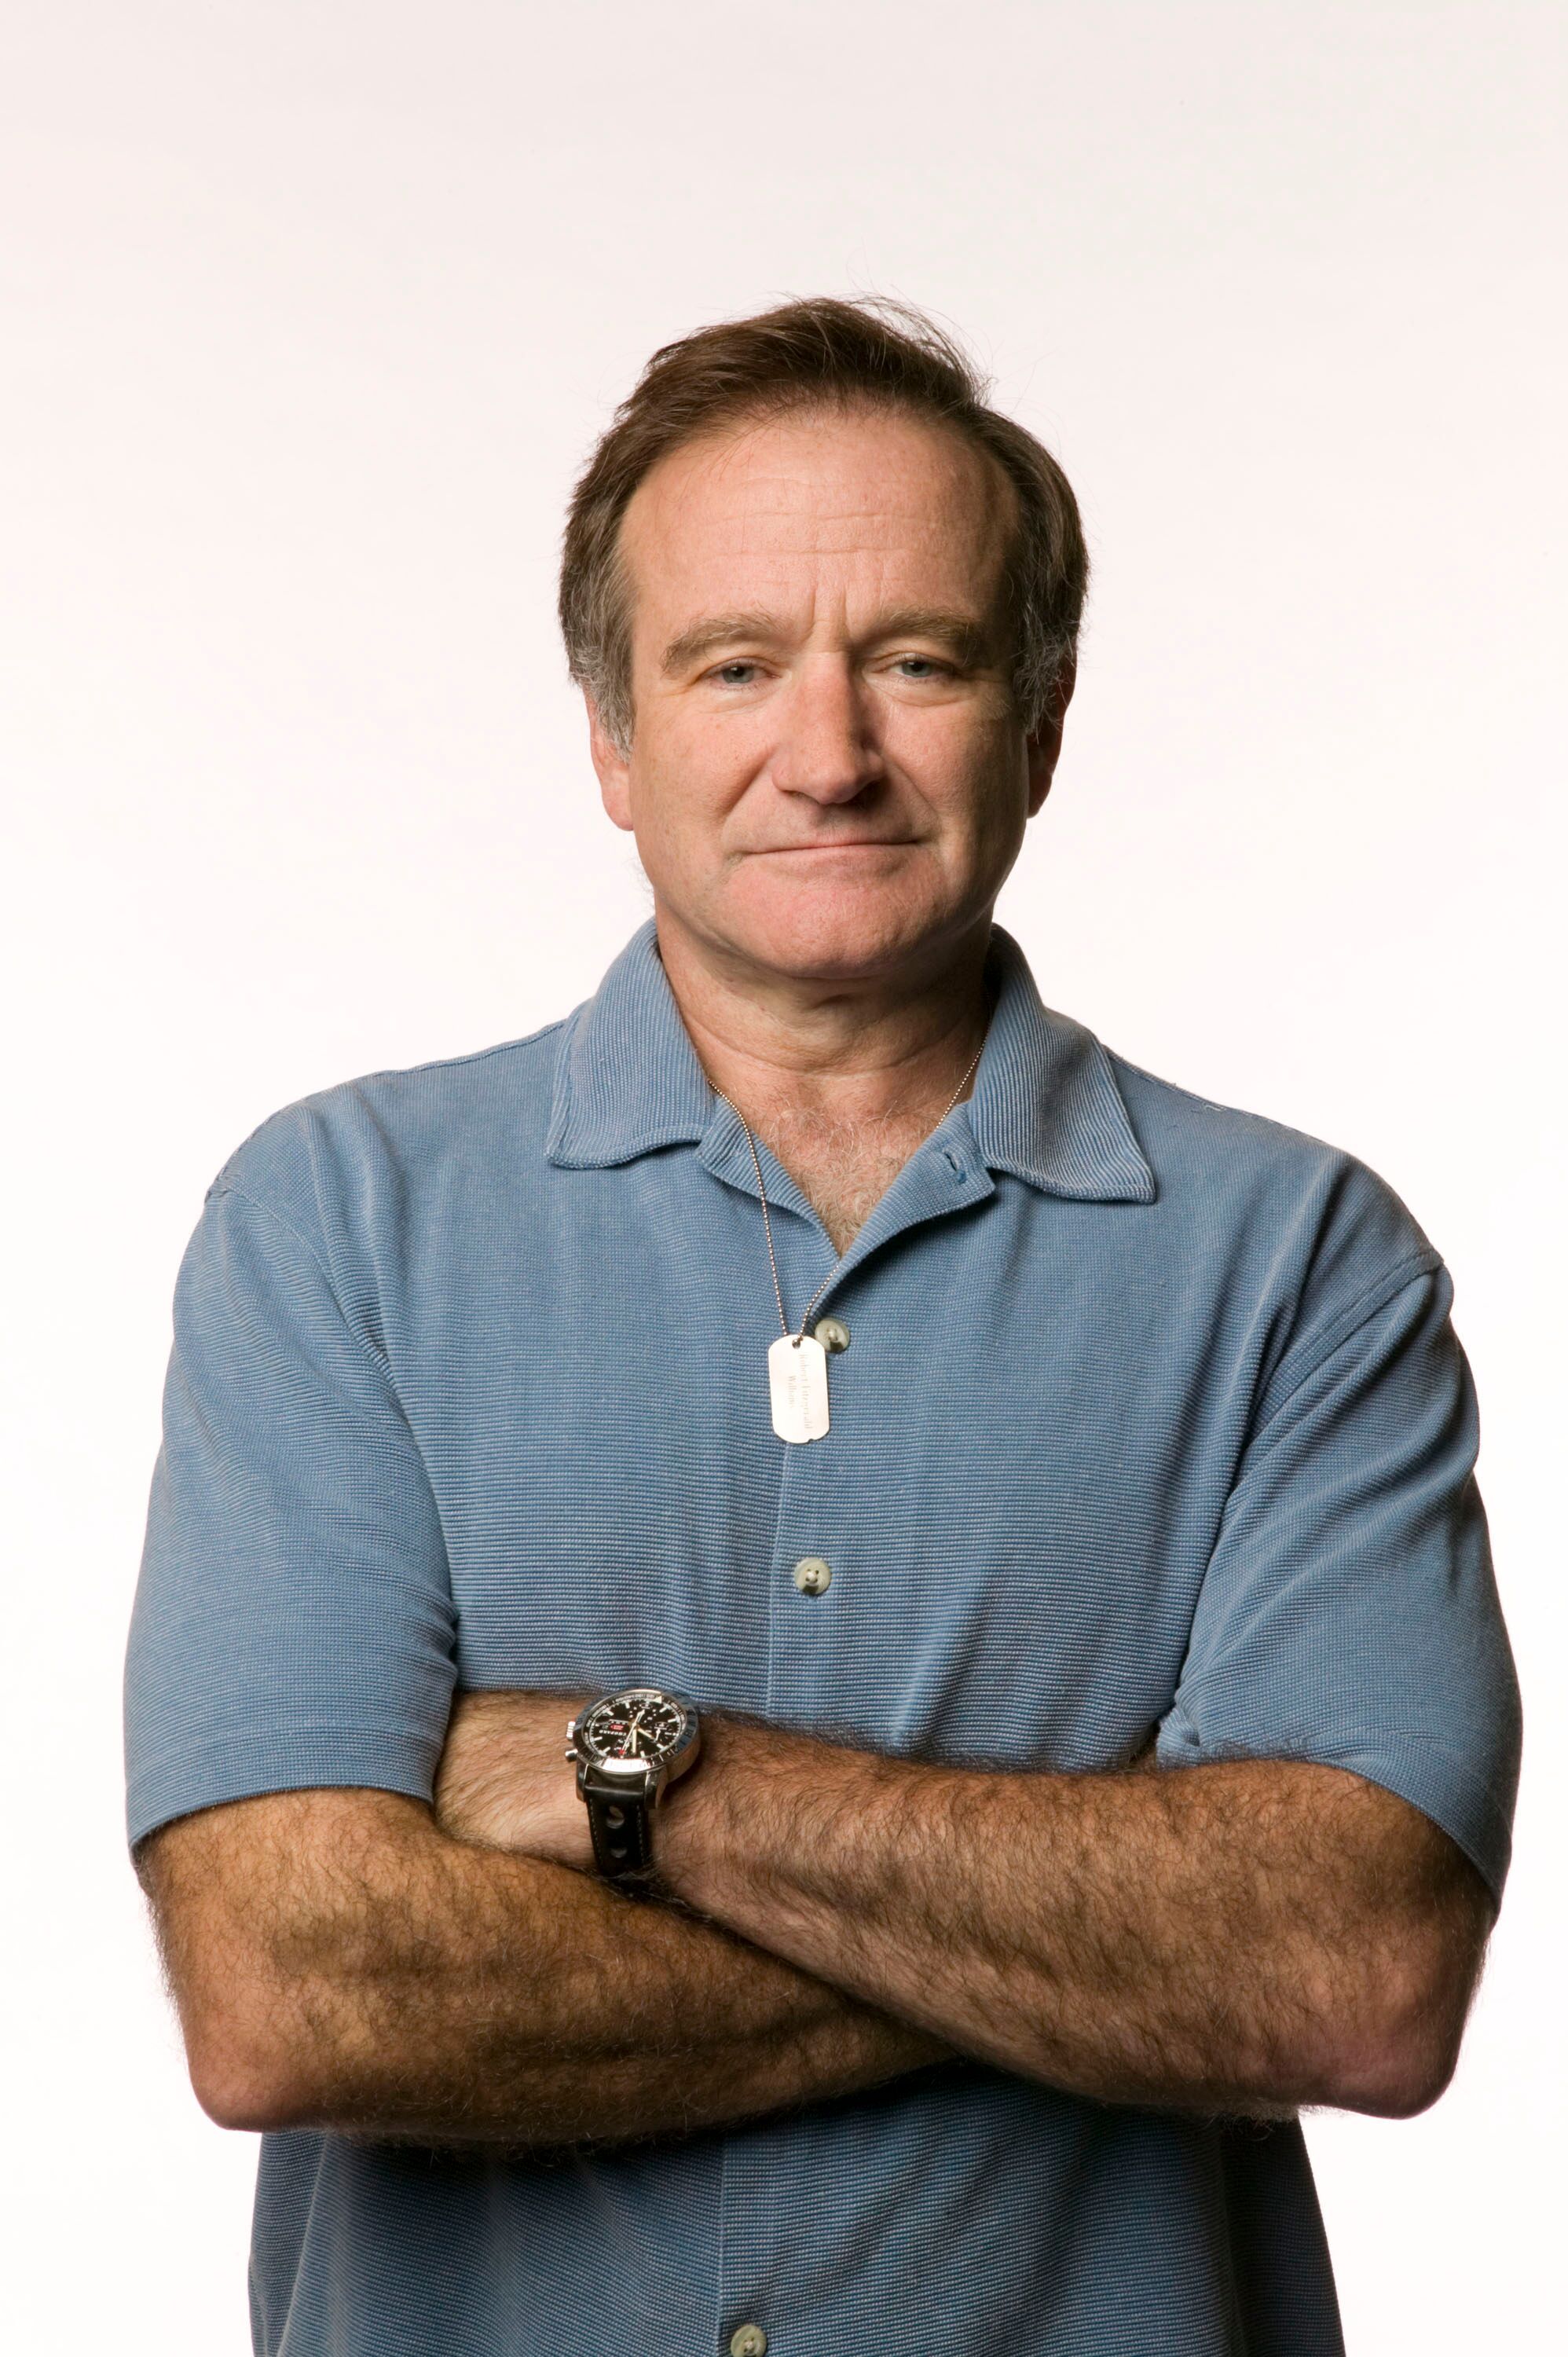 Robin Williams poses for the Search for the Cause campaign. | Source: Getty Images